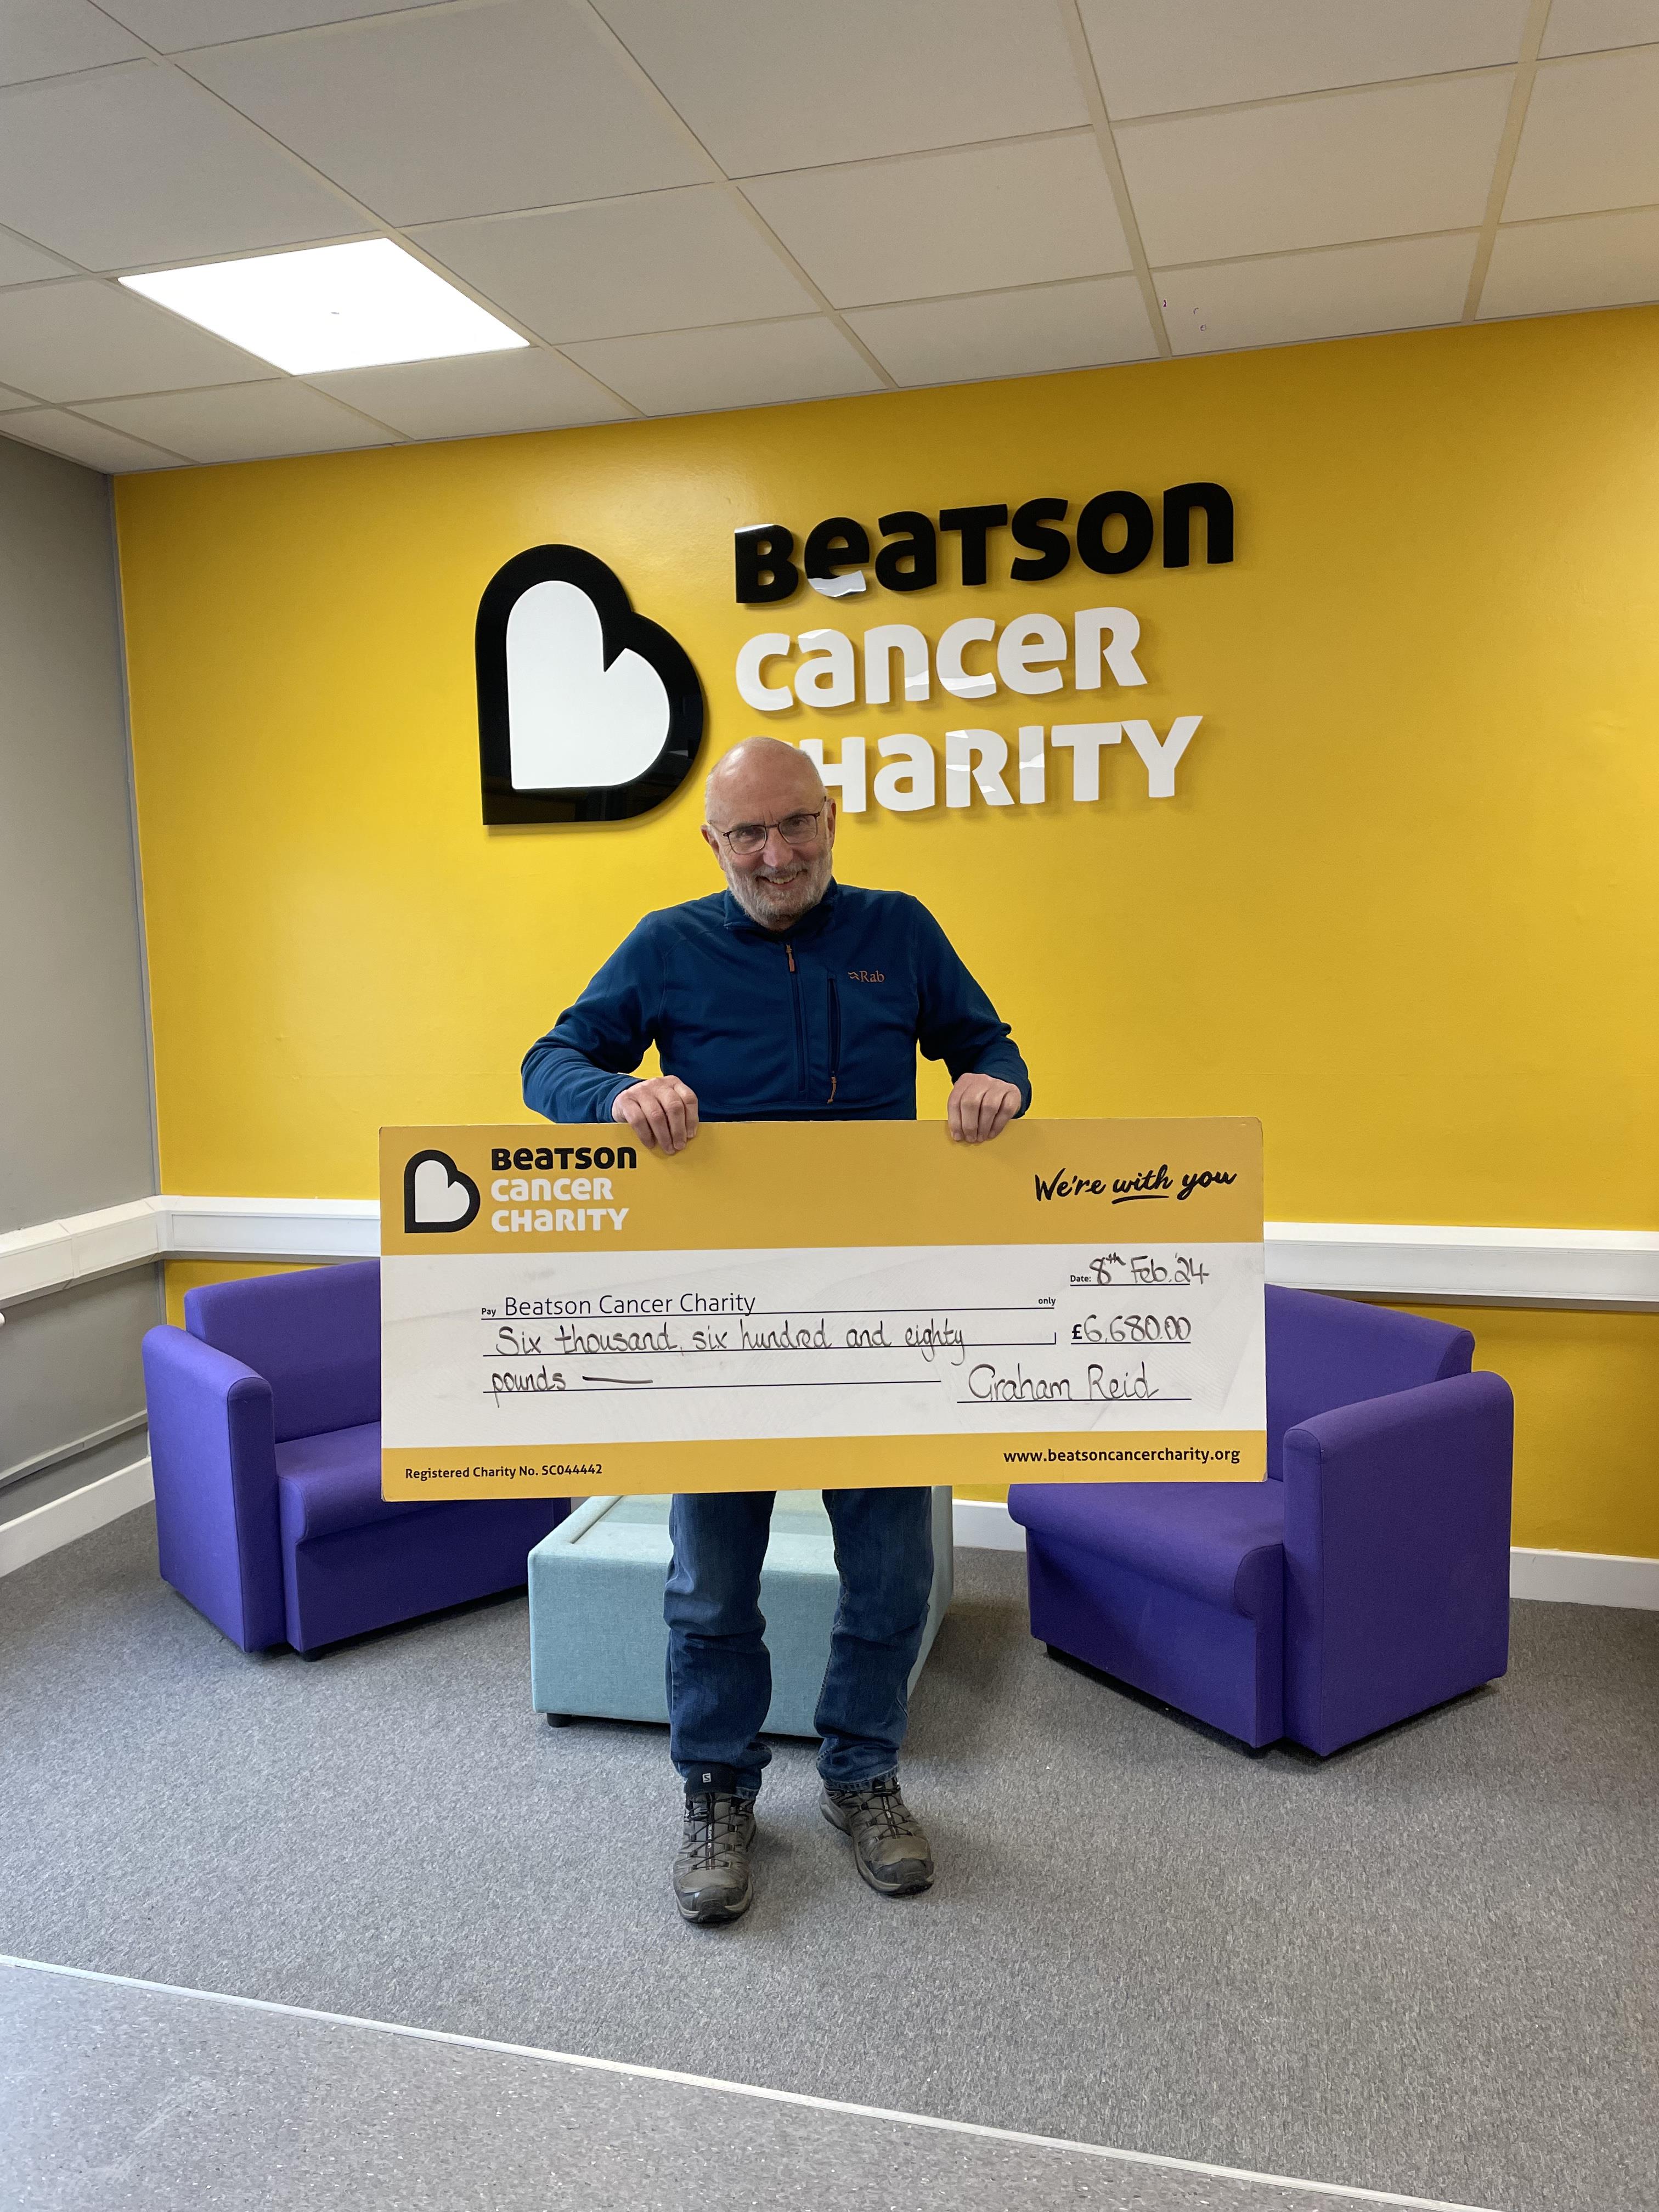 Graham raised thousands for Beatson Cancer Charity